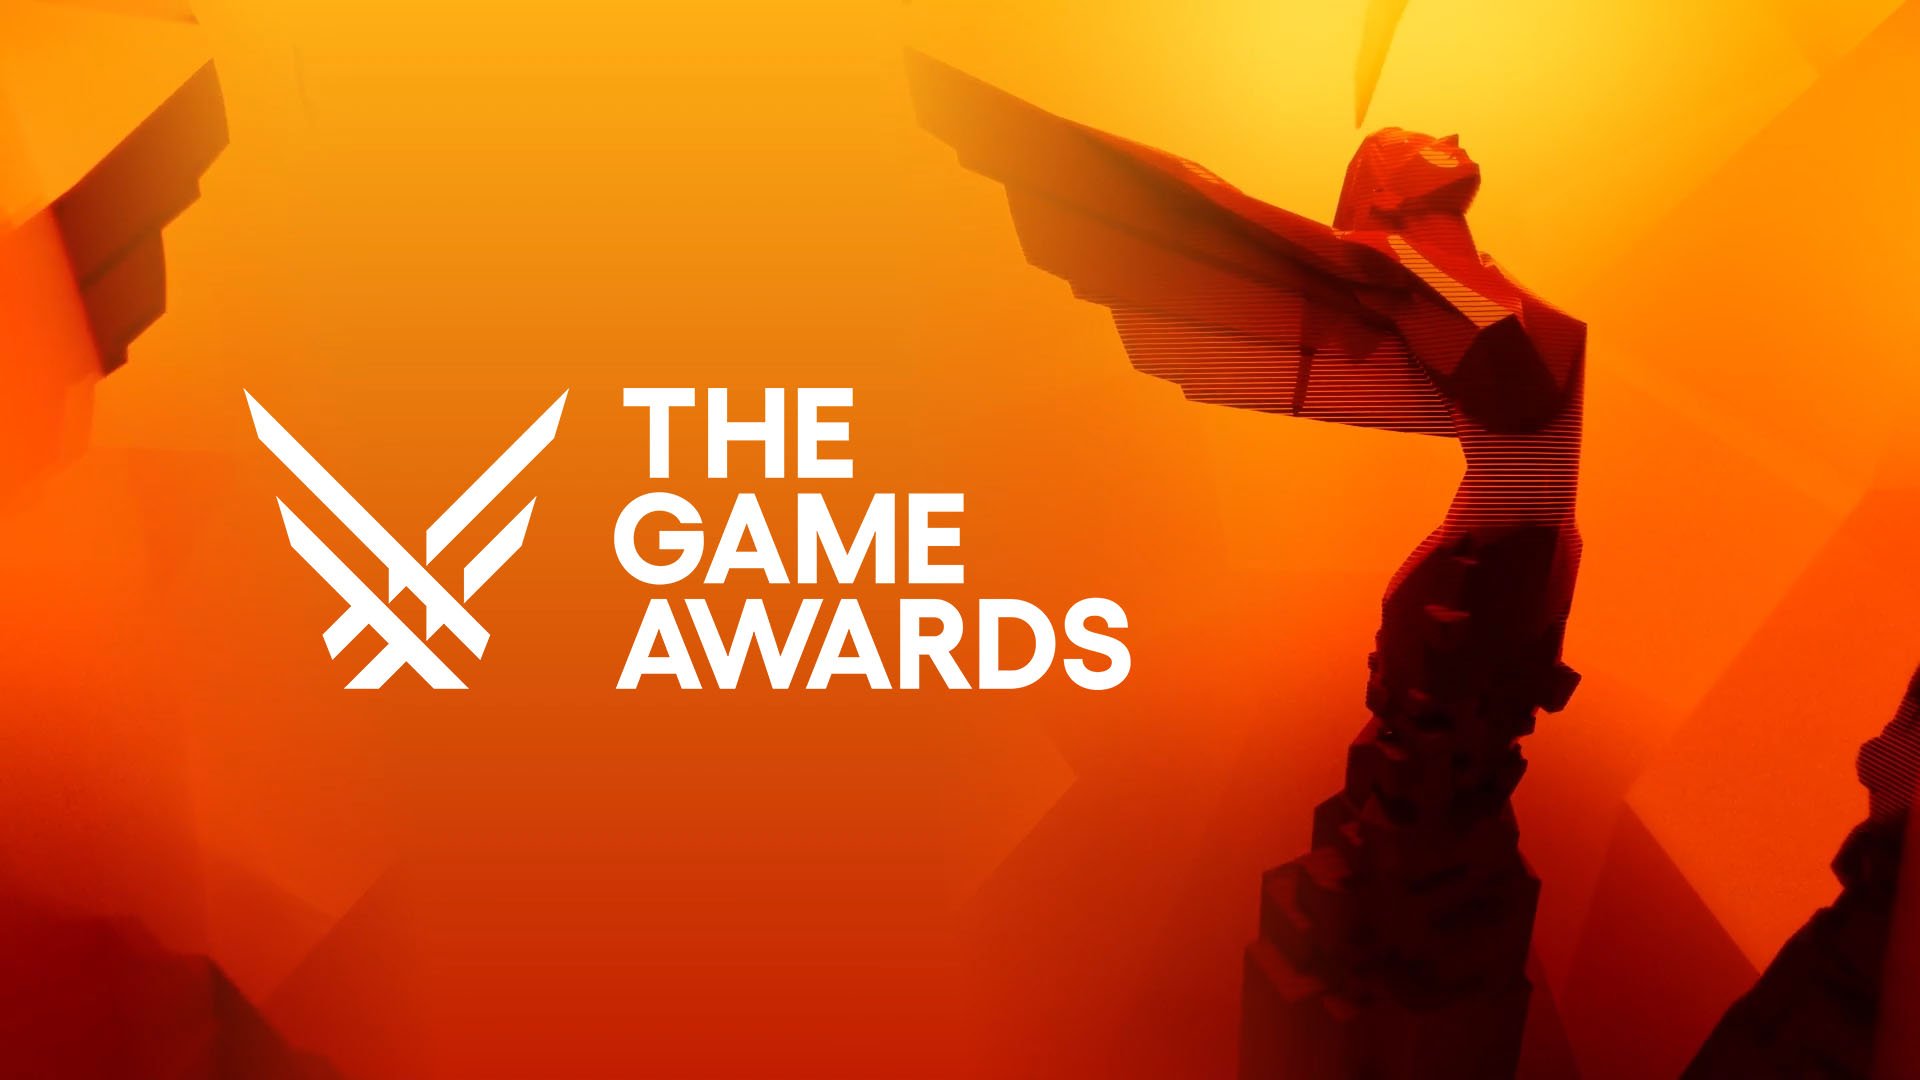 Cocoon wins Best Debut Indie Game at The Game Awards 2023 - Level Push